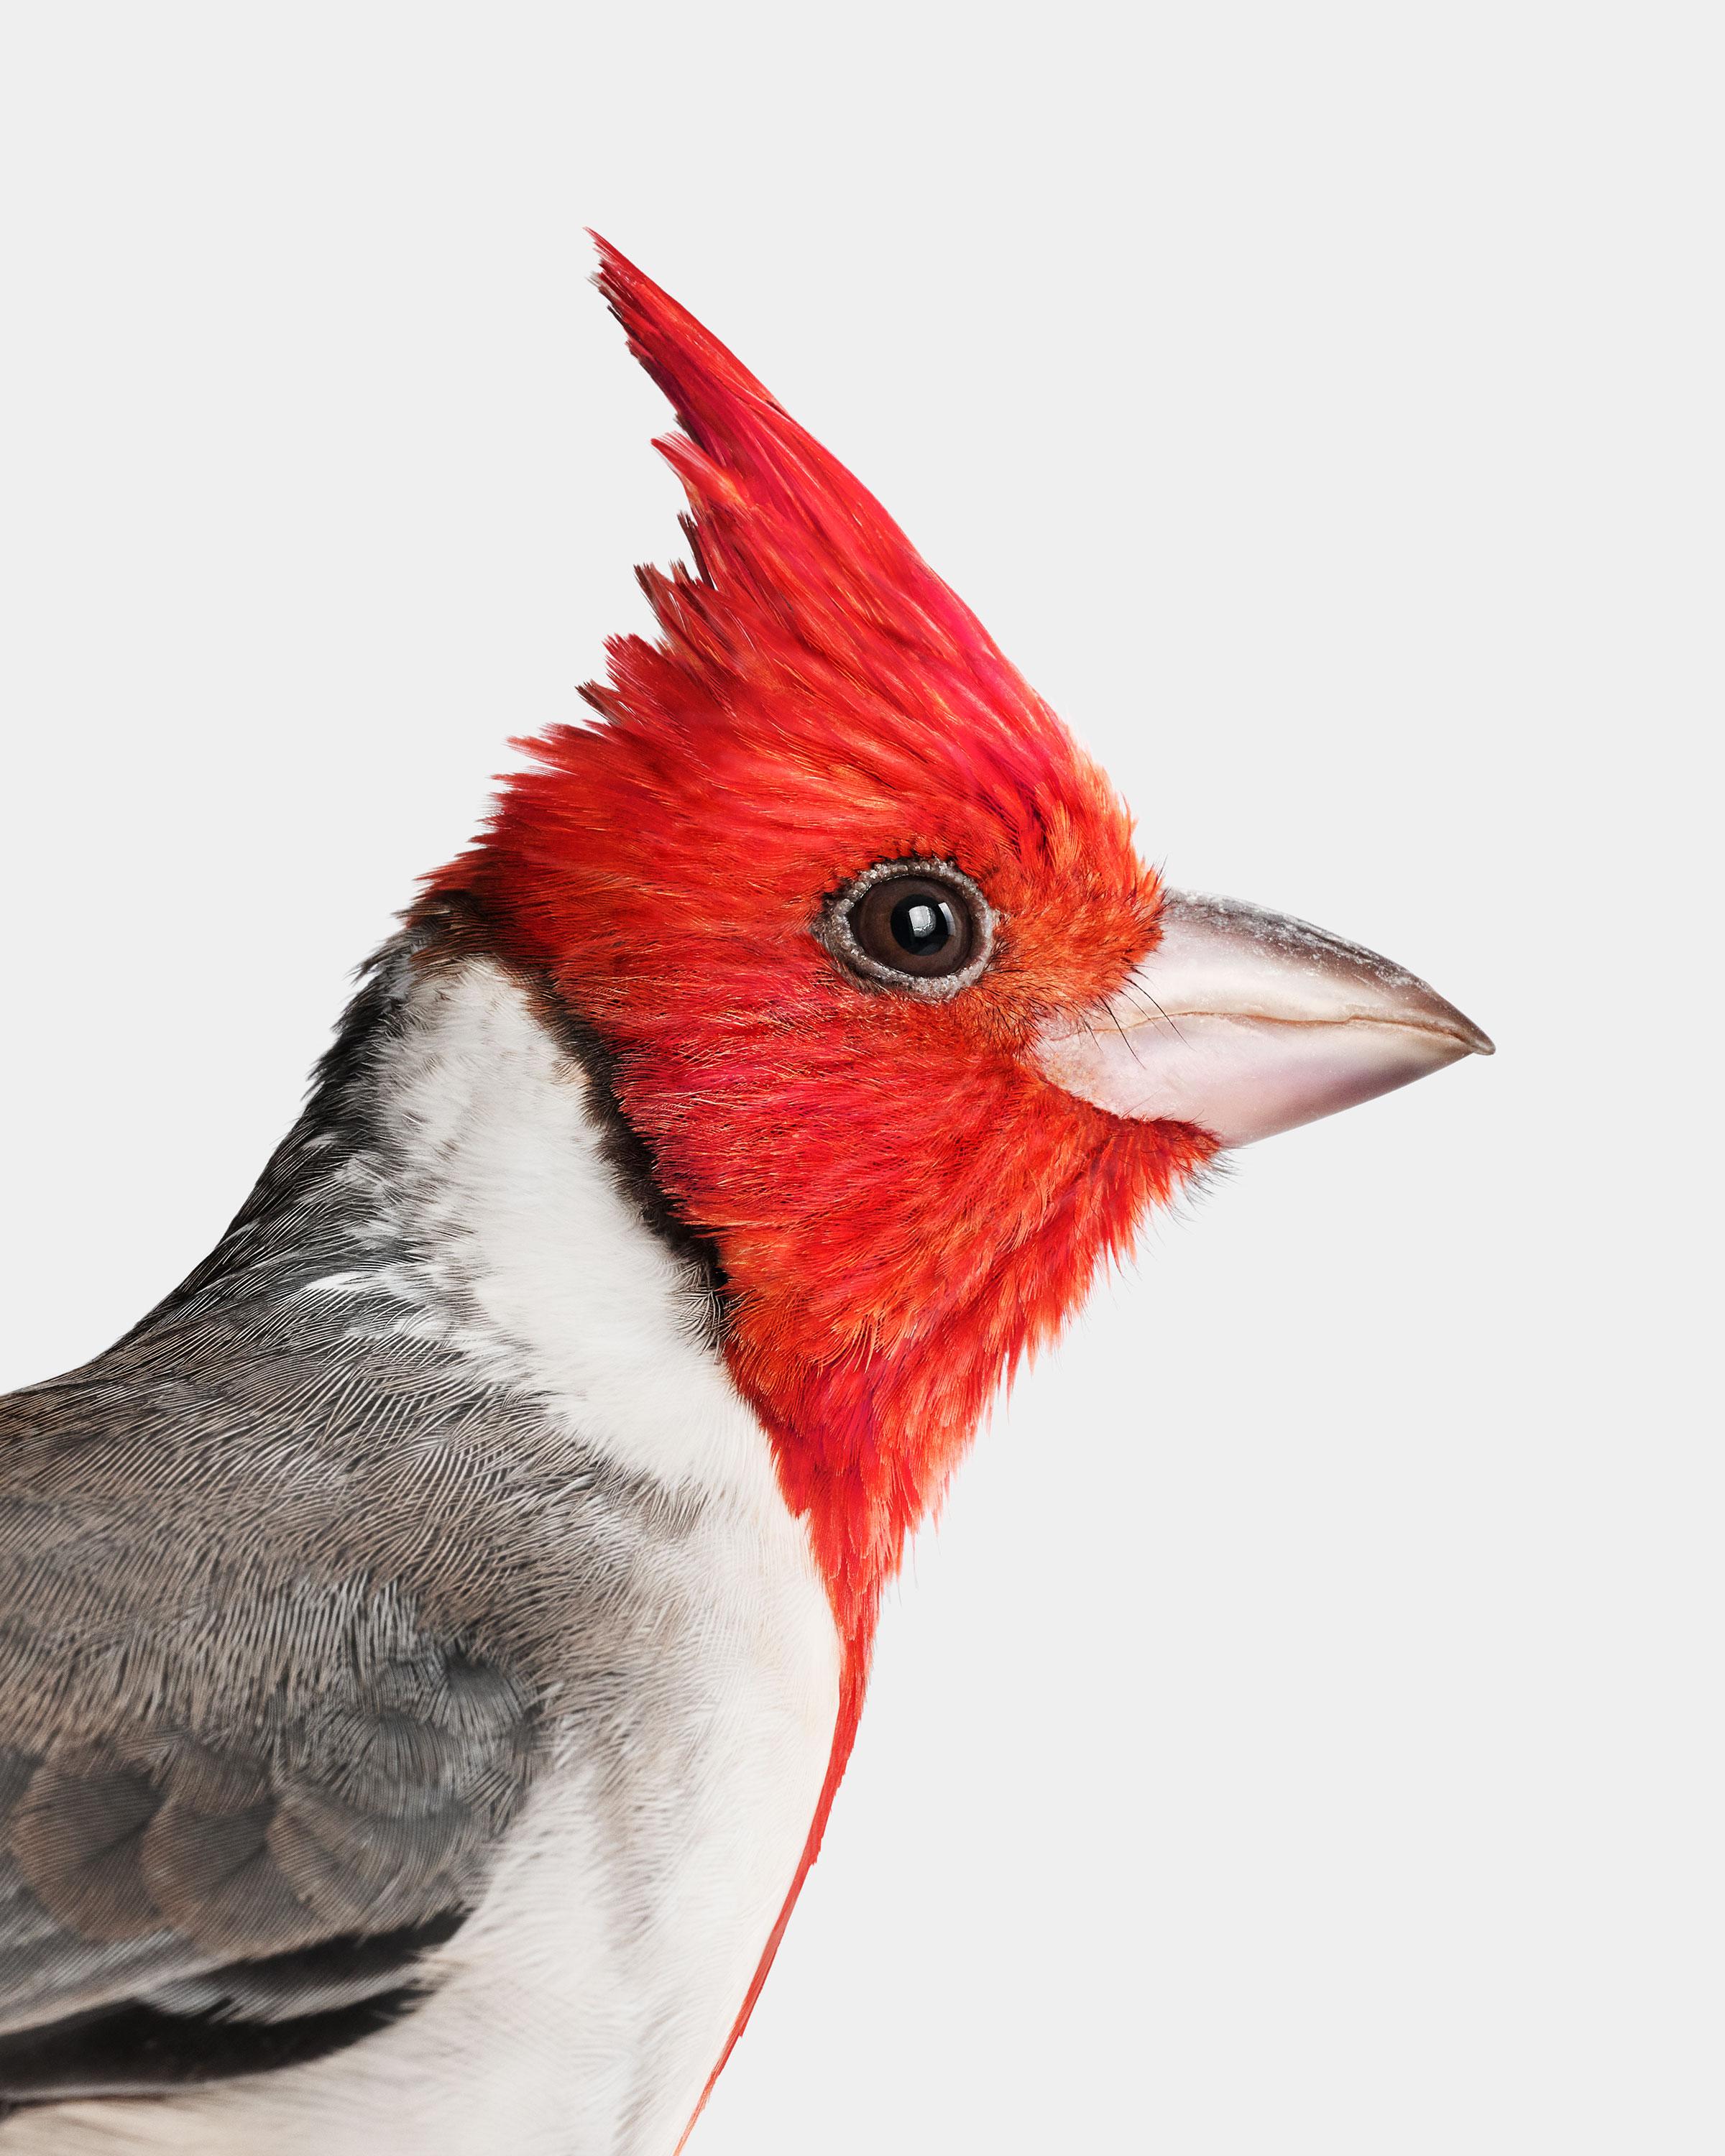 Randal Ford Animal Print - Red Crested Cardinal (60" x 48")